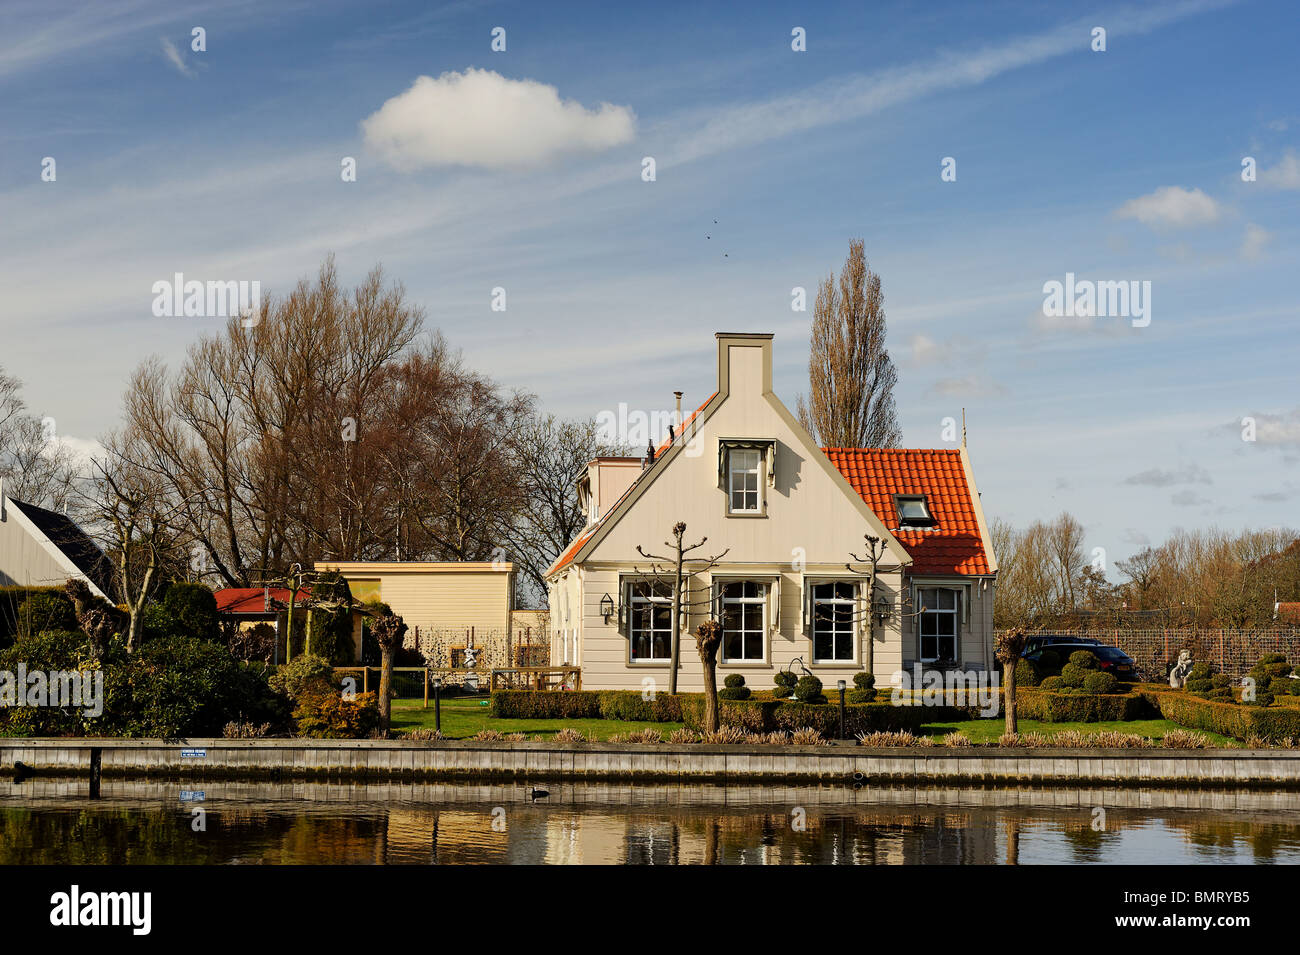 House facing canal In Broek in Waterland, Netherlands. Stock Photo